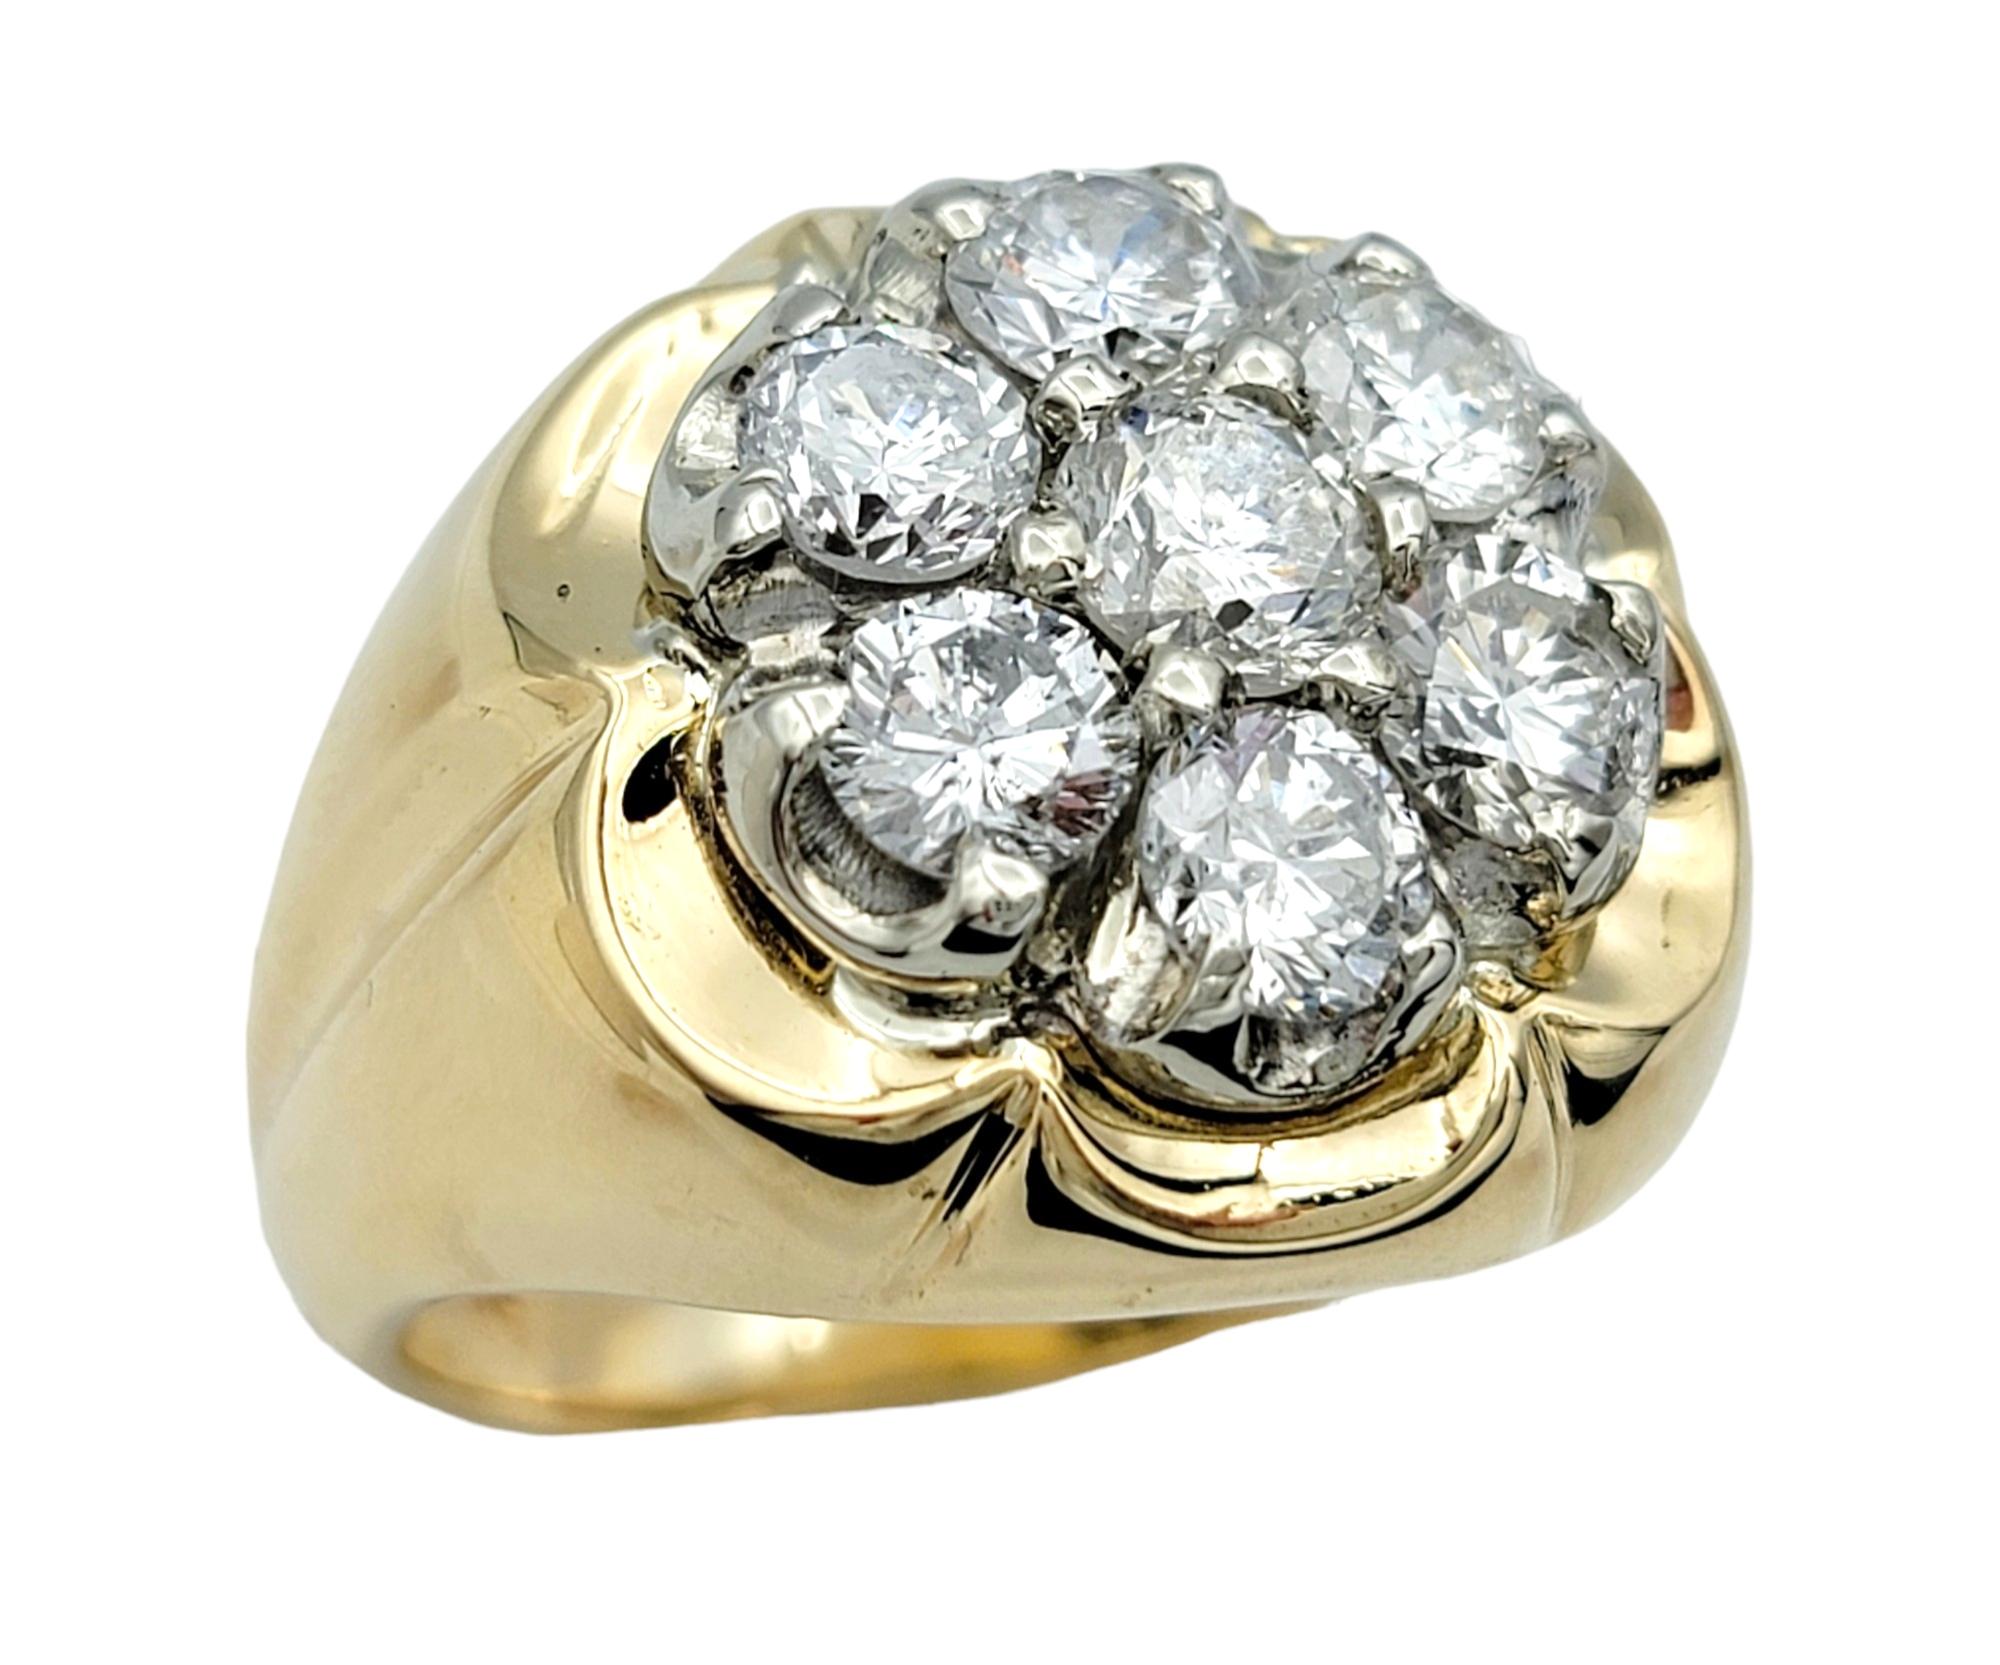 Ring Size: 9

This stunning diamond flower motif ring in 14 karat yellow gold is a stunning piece that captures the beauty of nature in its design. Crafted with exquisite attention to detail, this ring features an impressive flower motif made of